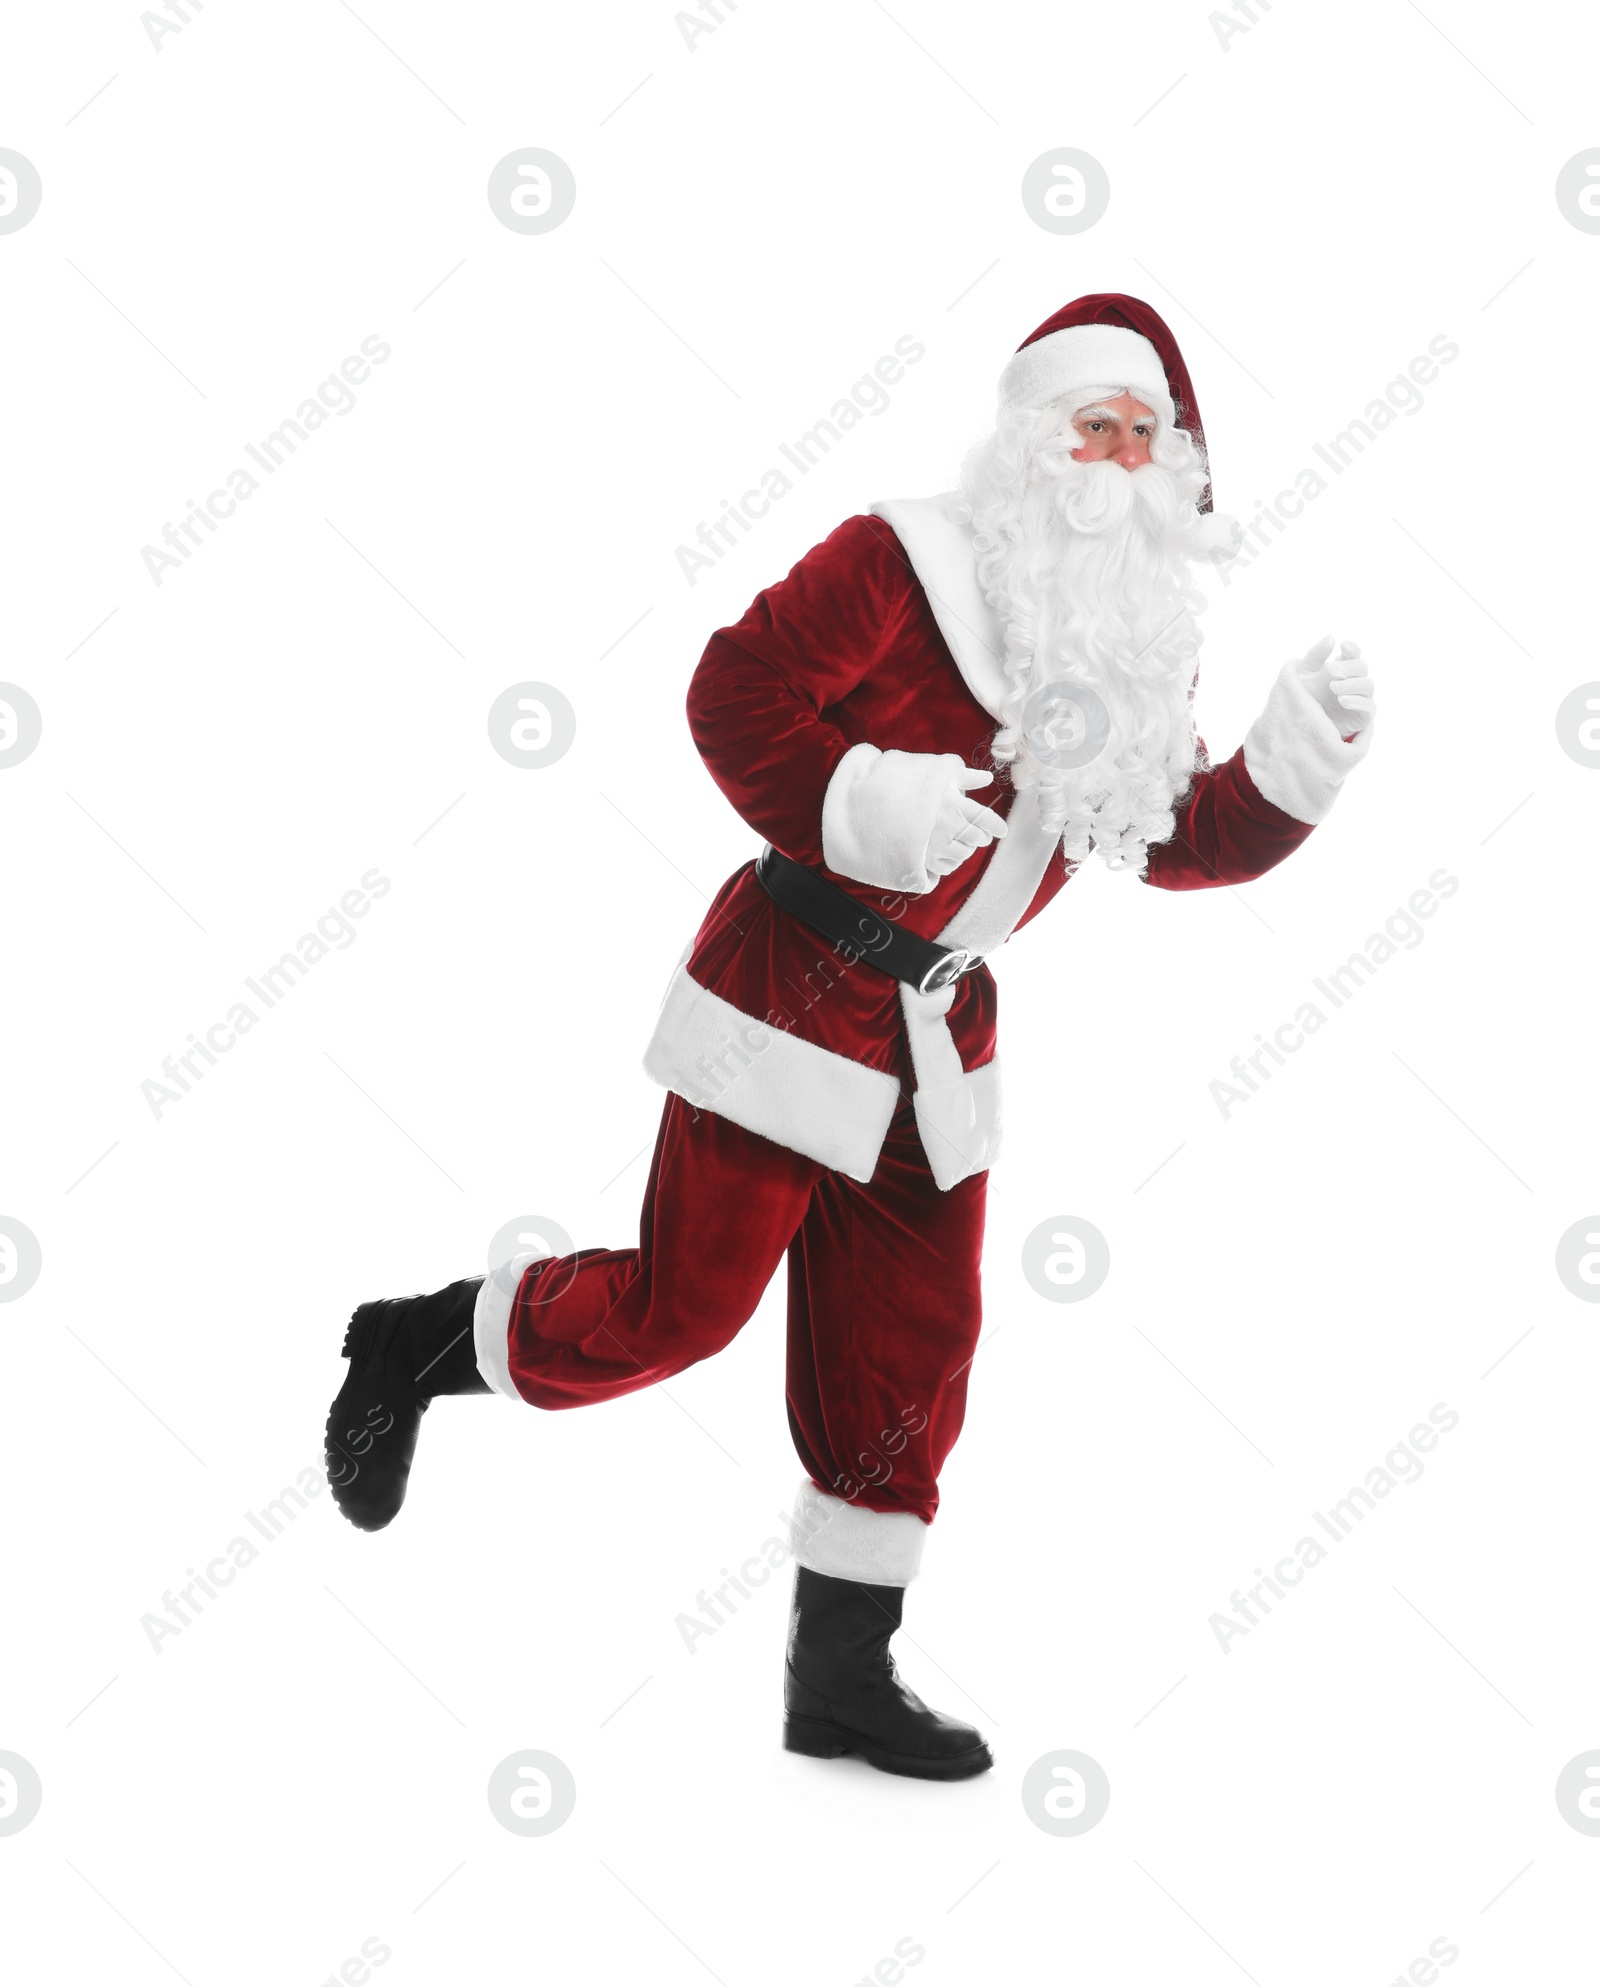 Photo of Santa Claus in costume running on white background